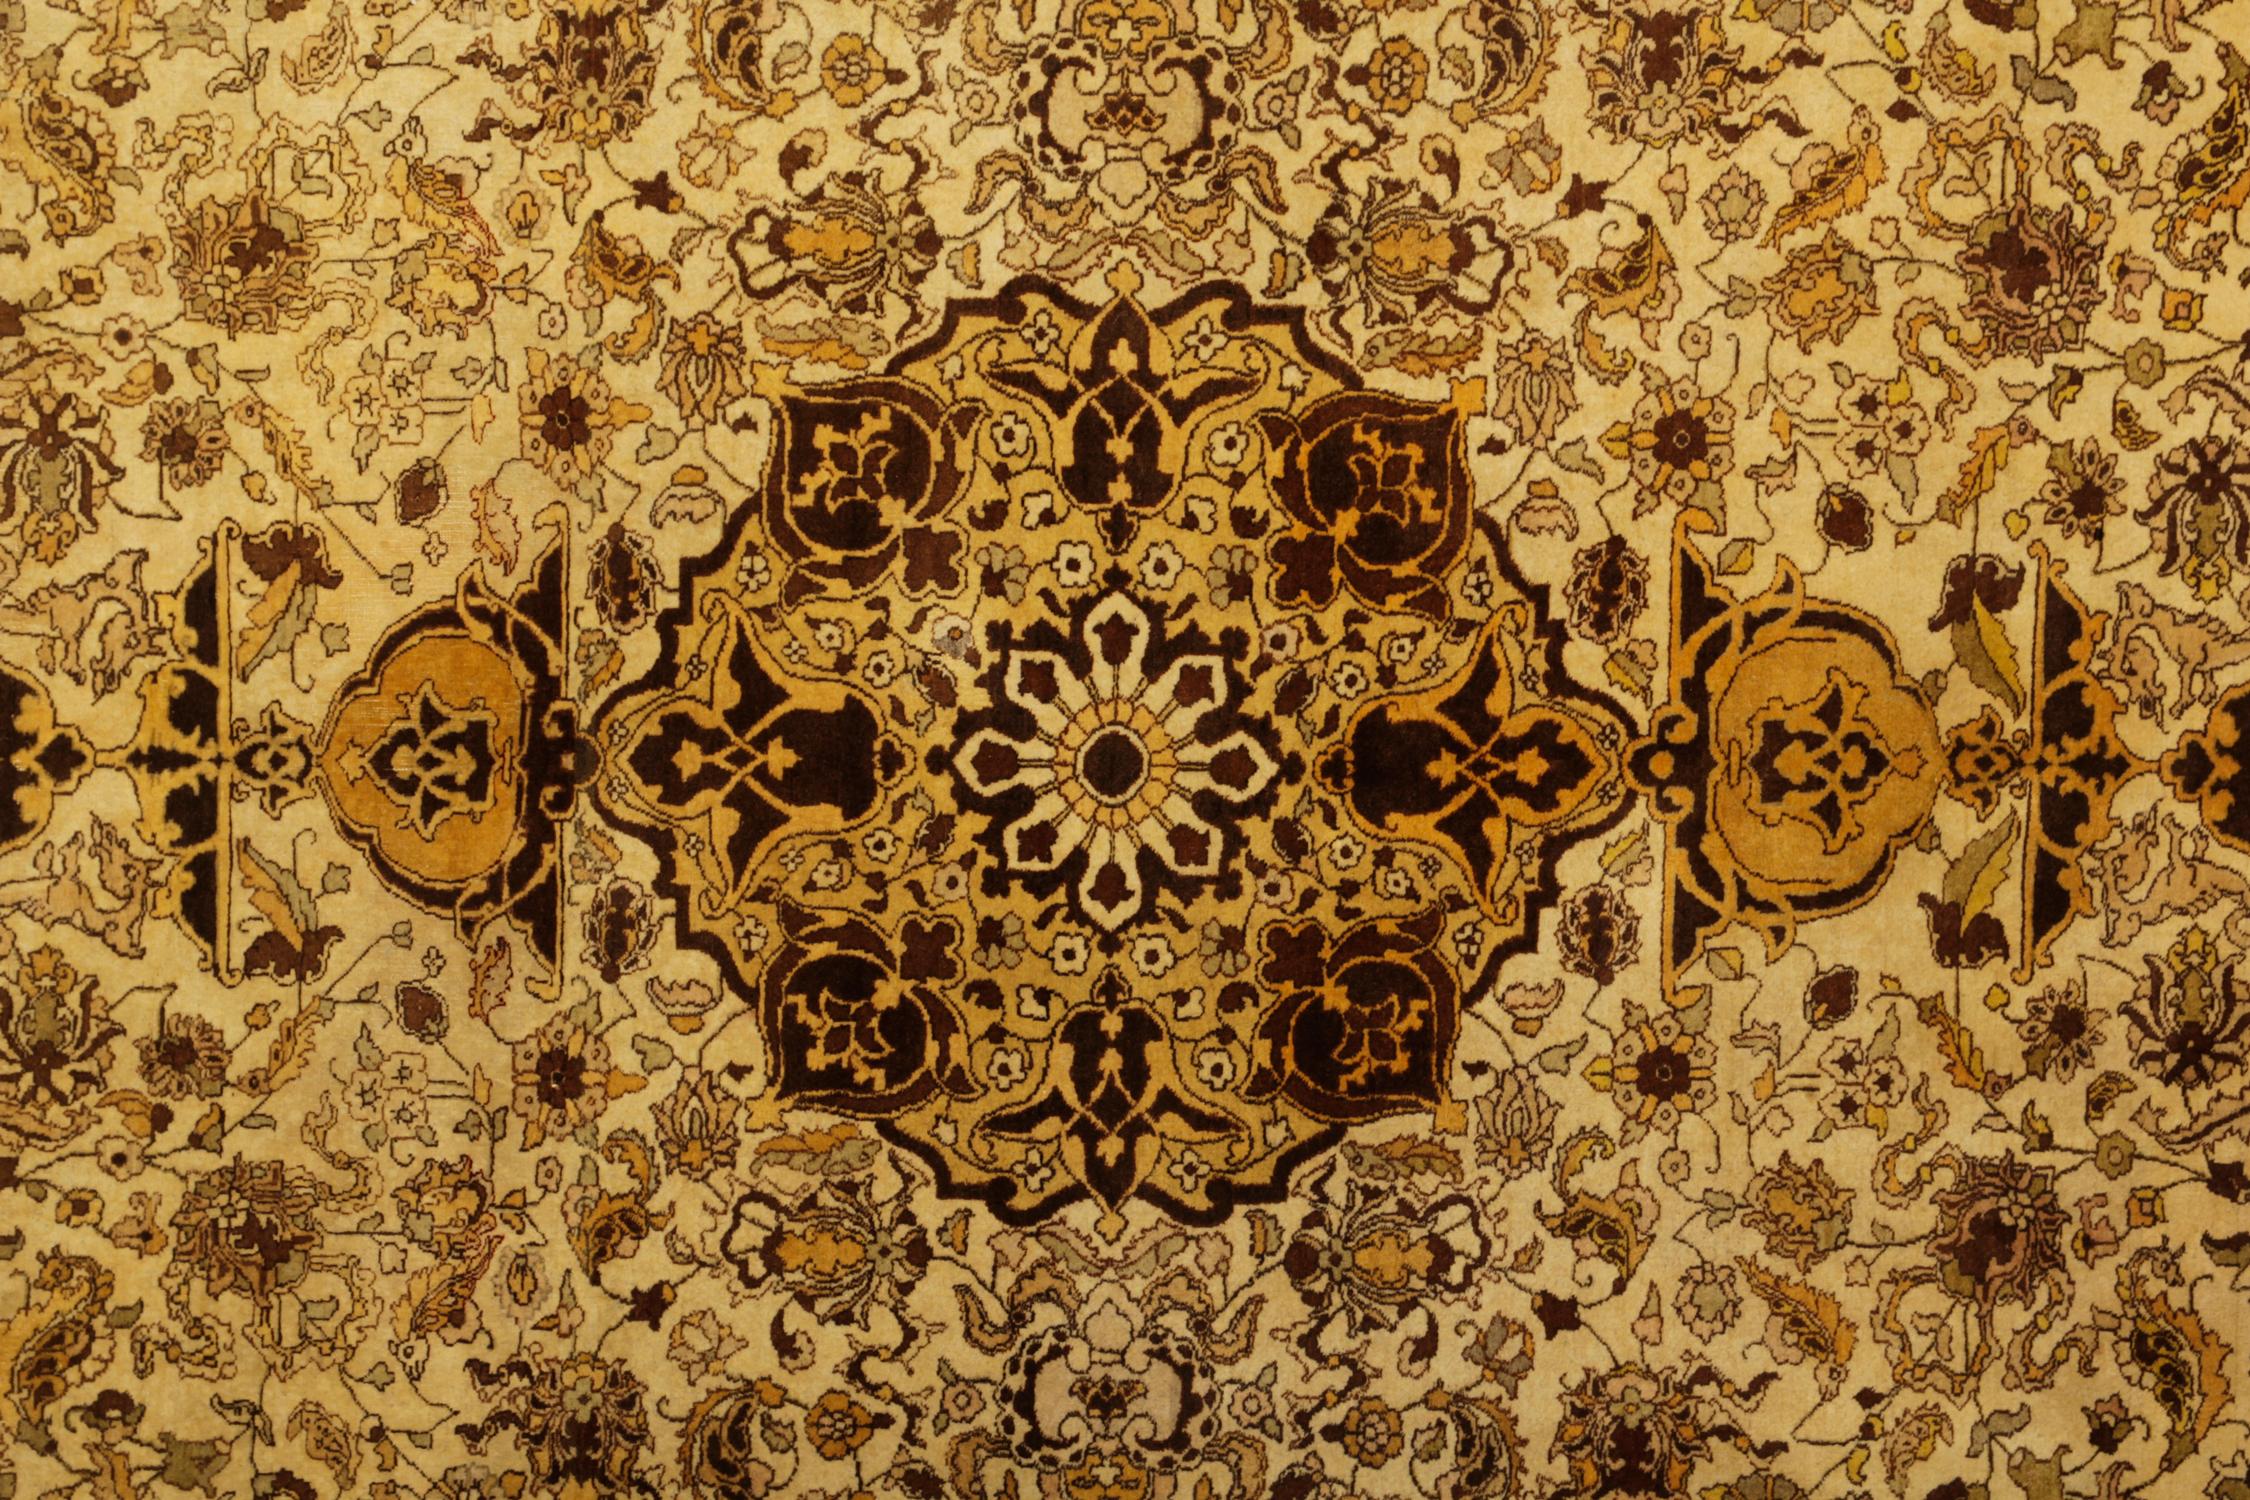 This Antique oriental rug was woven in the 1920s and features a gold, beige gold background that contrasts beautifully with the brown and black accents. The central and surrounding design is a symmetrical pattern revealing floral and botanical